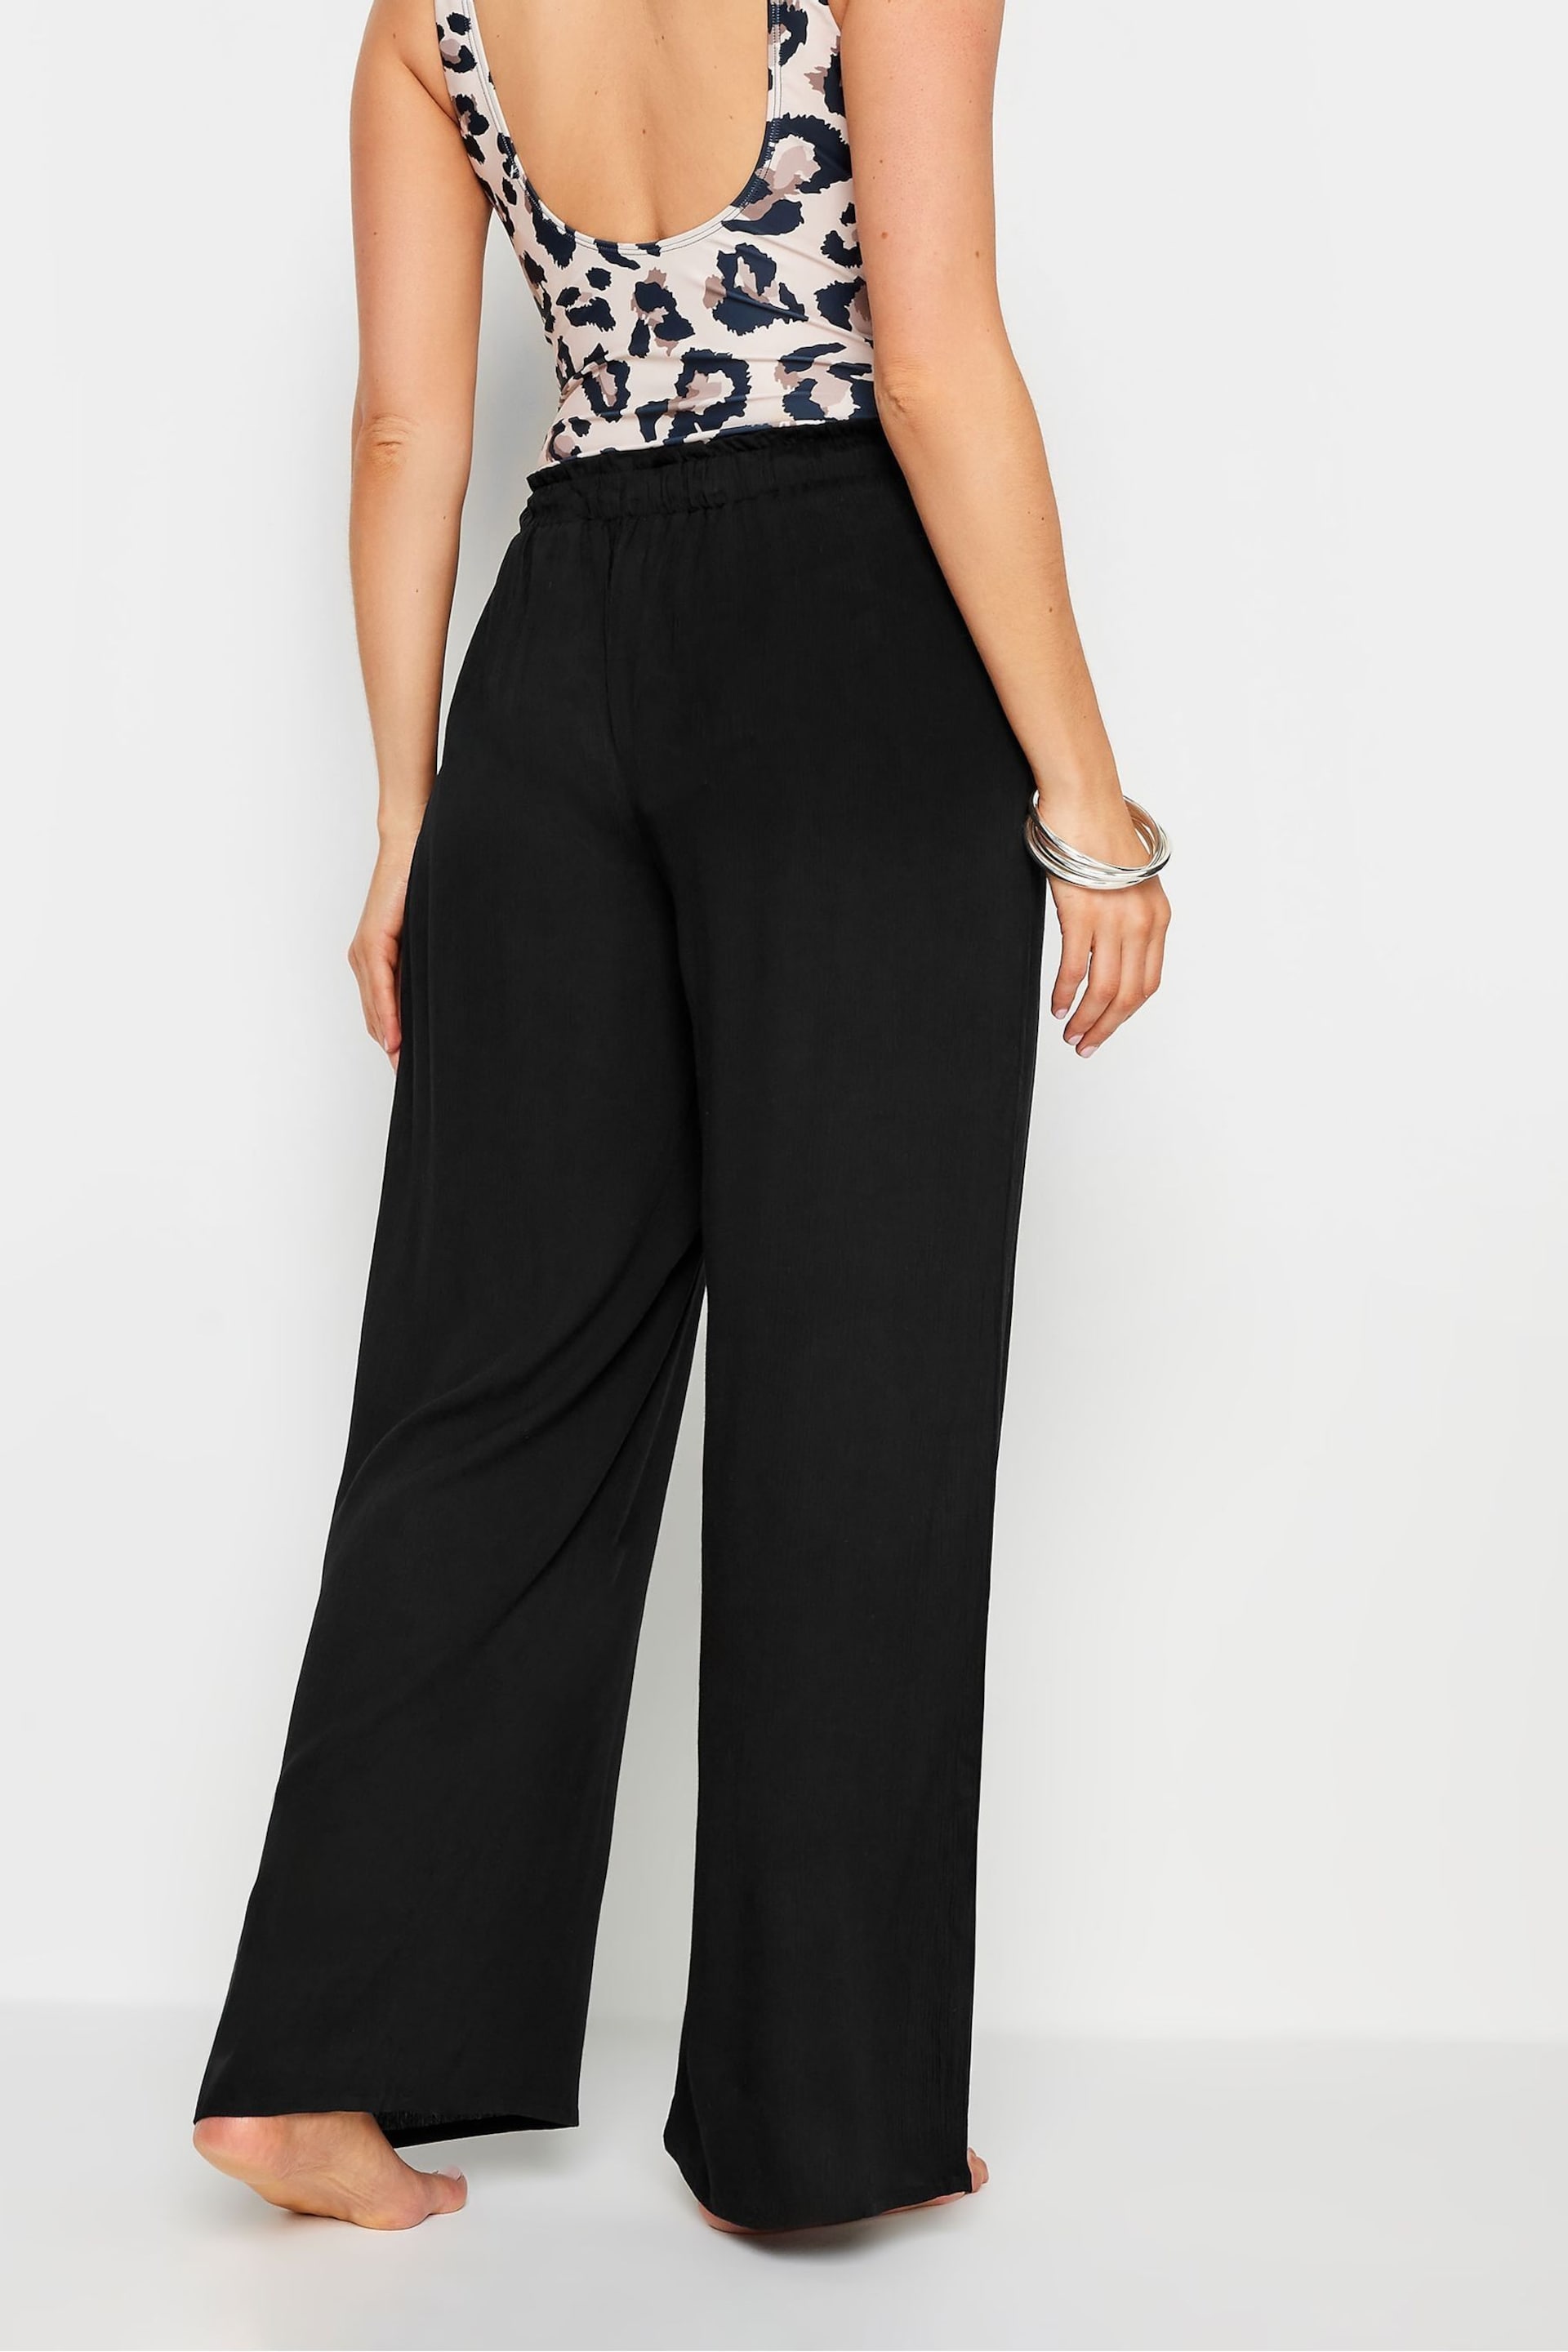 Long Tall Sally Black Crinkle Trousers - Image 3 of 6